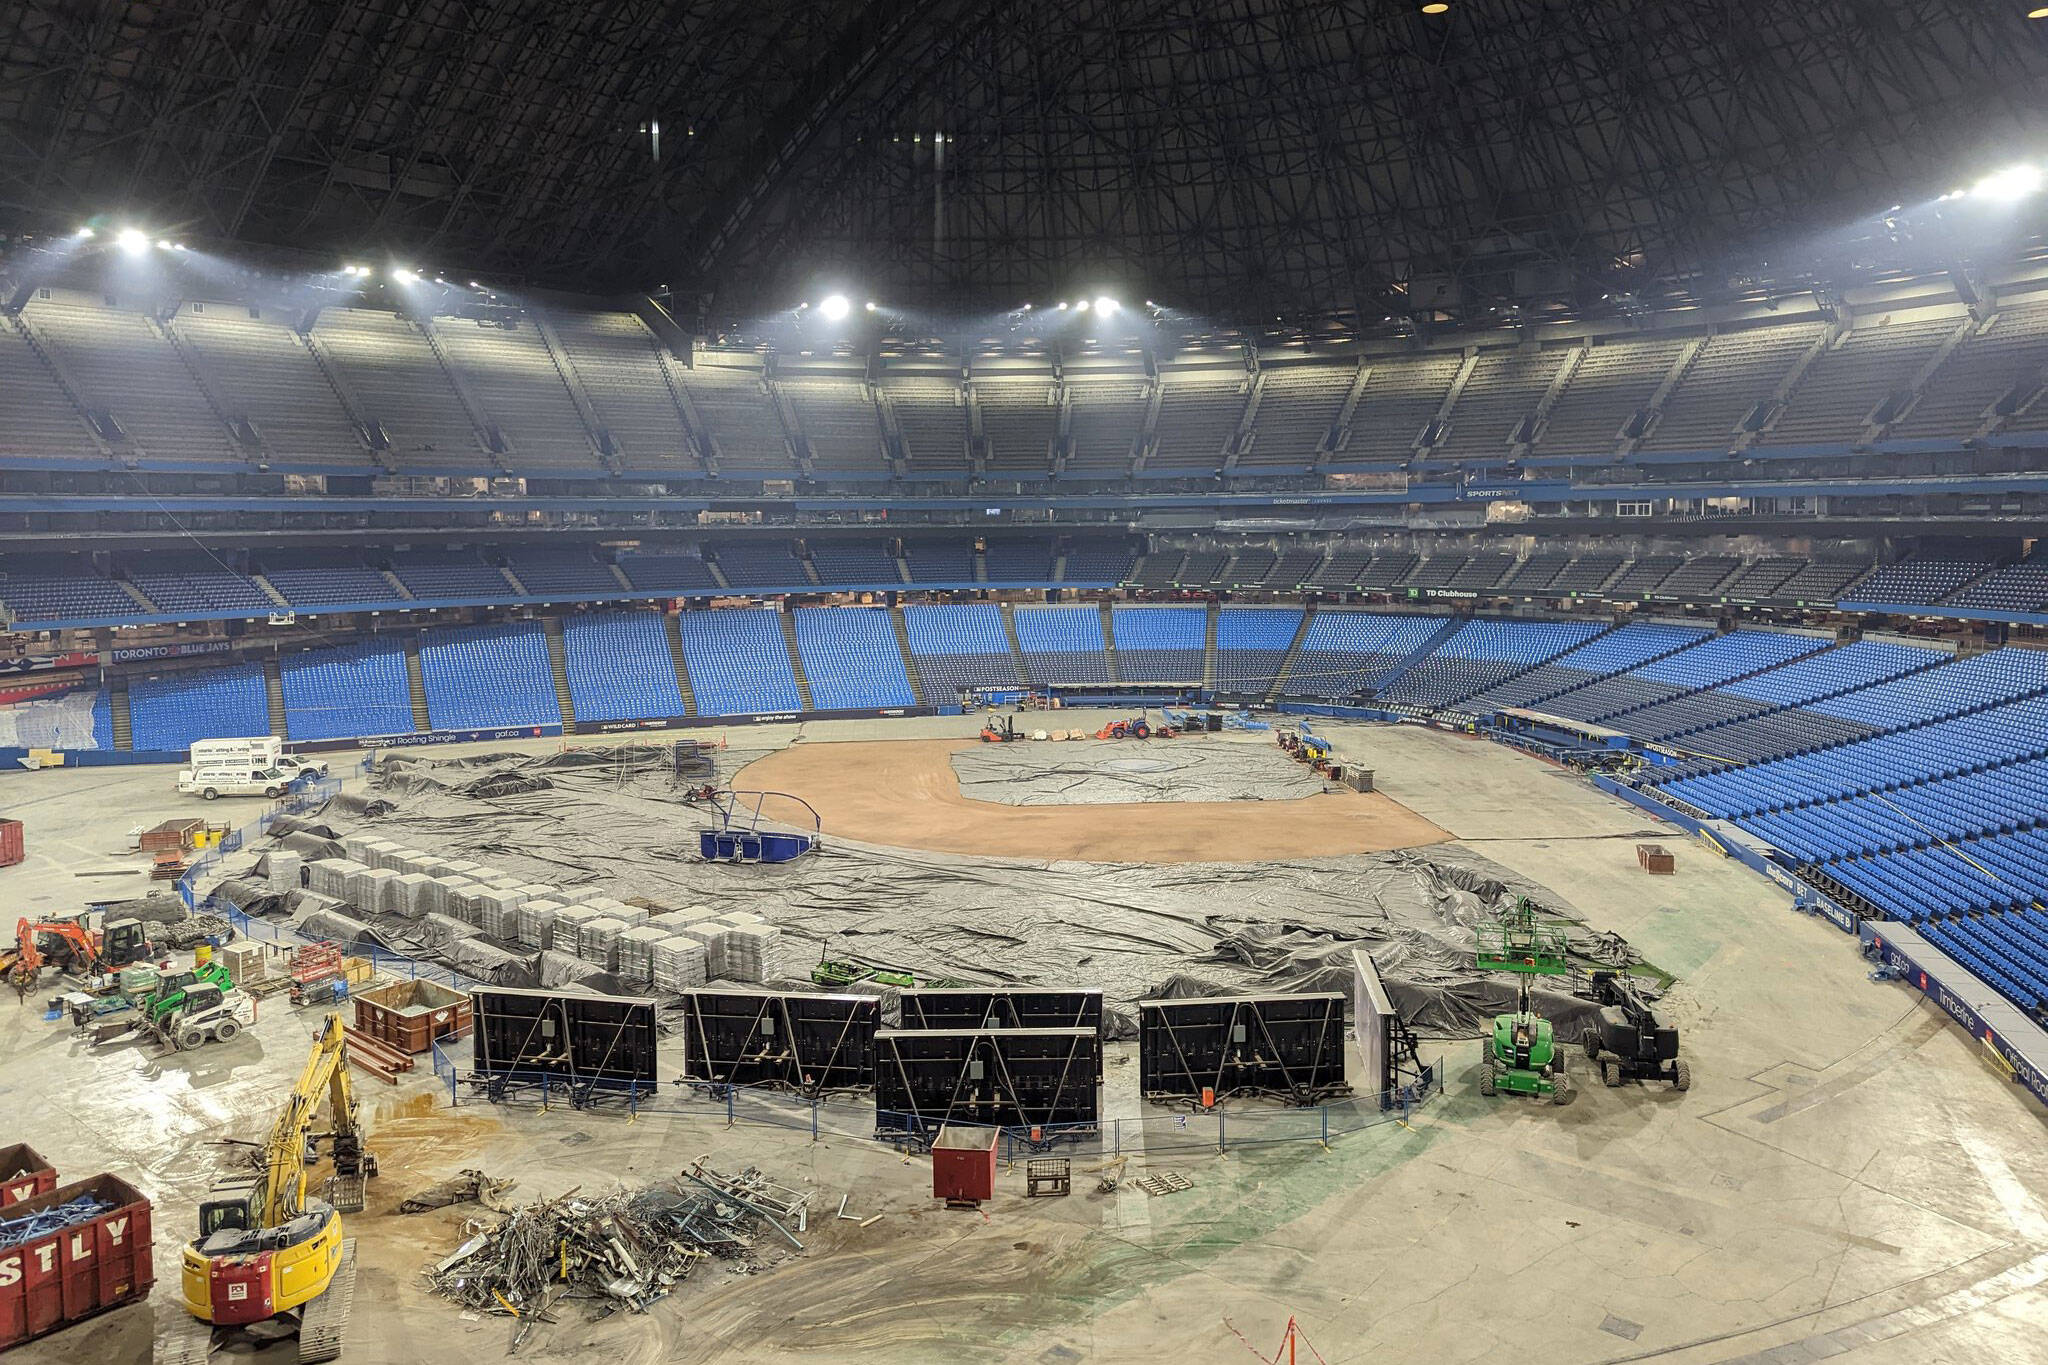 rogers centre upgrades